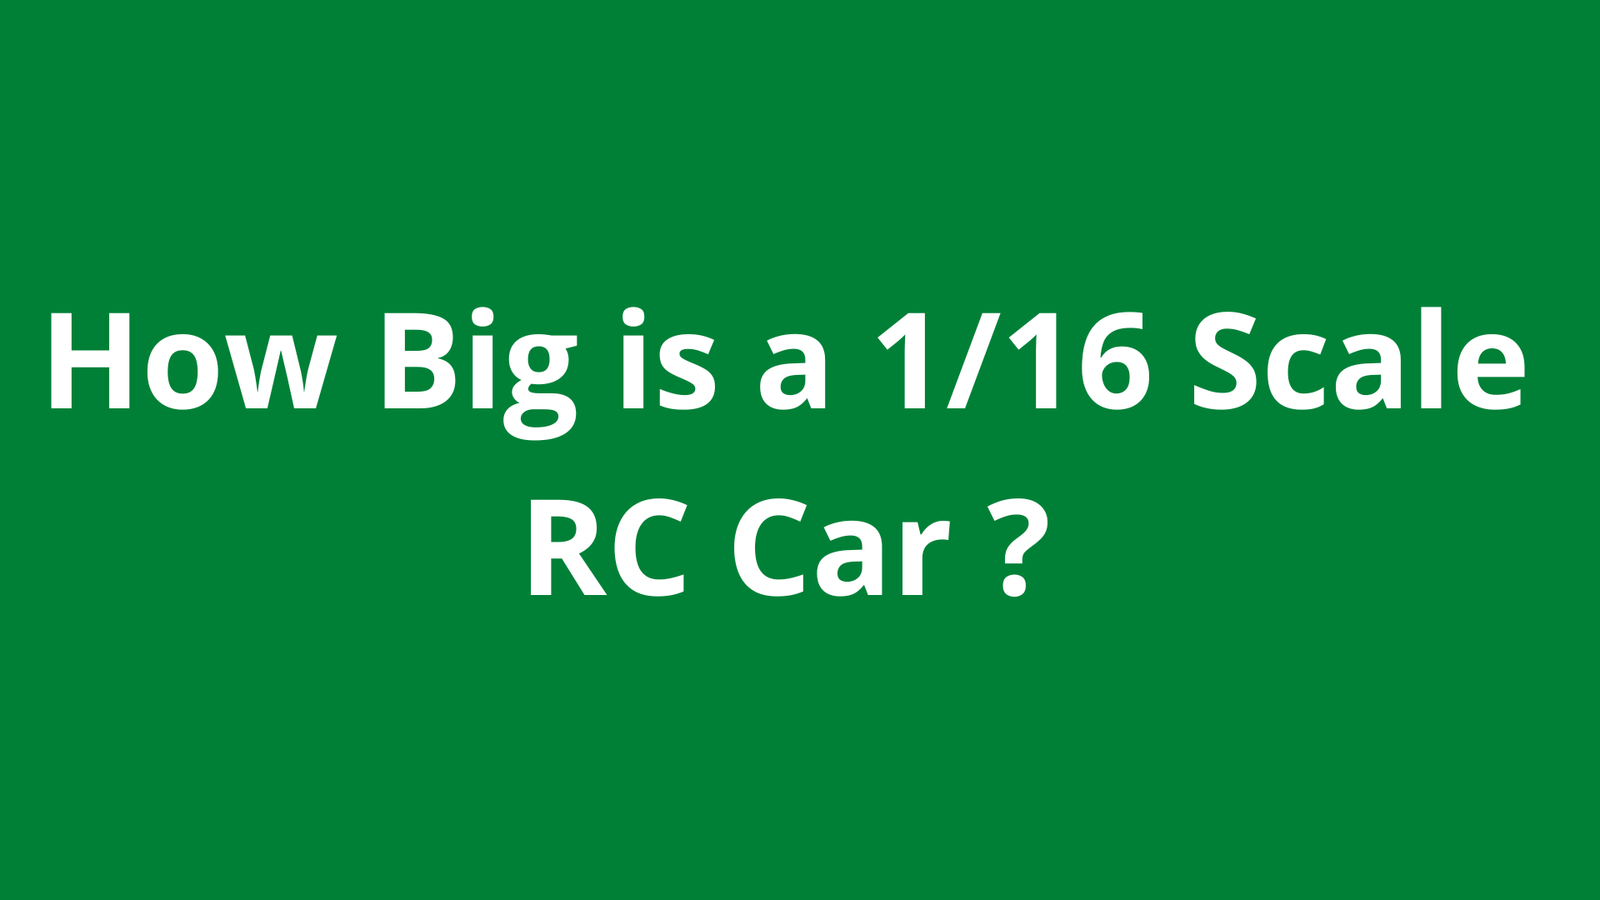 How Big is a 1/16 Scale RC Car